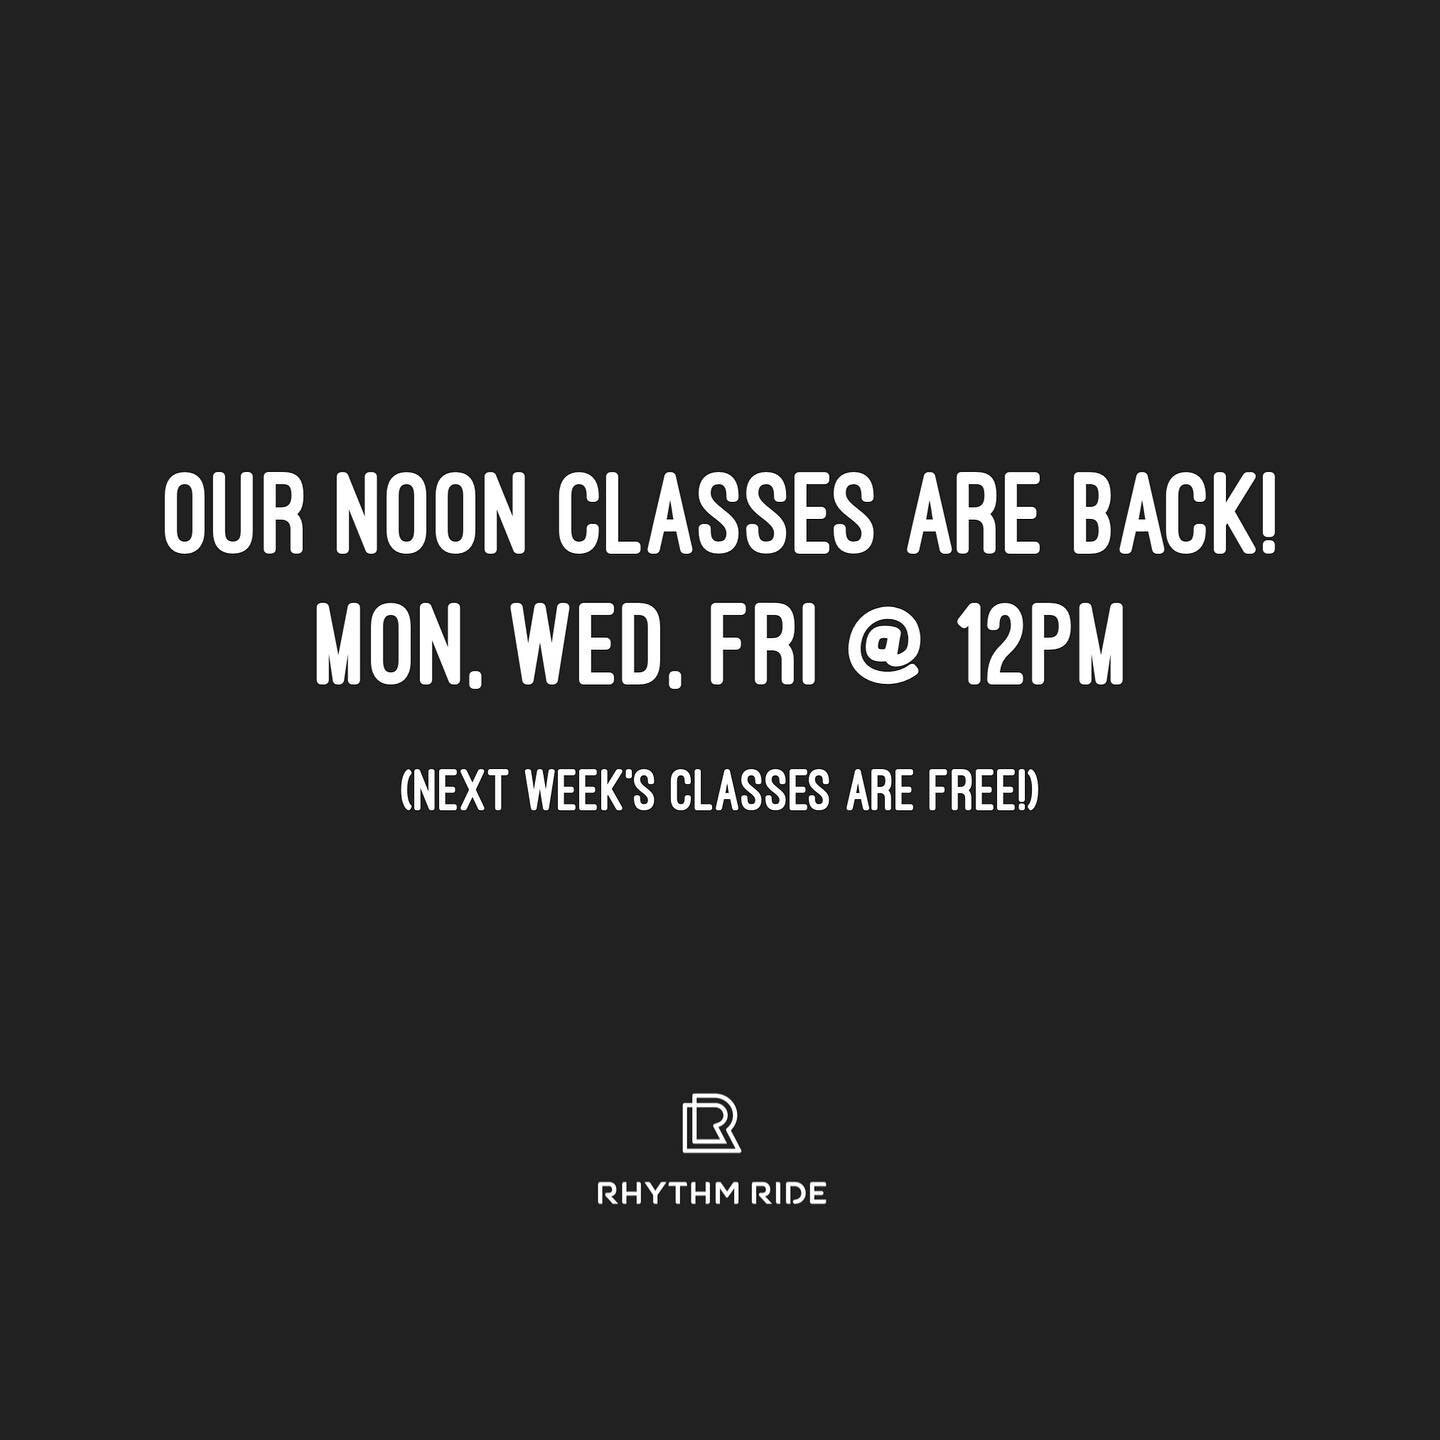 Rhythm Ride noon classes are back!
Mondays, Wednesdays &amp; Fridays at 12pm!
All noon classes are FREE next week so you can try them out and work them into your weekly routine! Perfect for your lunch break, if you have shift work, for parents while 